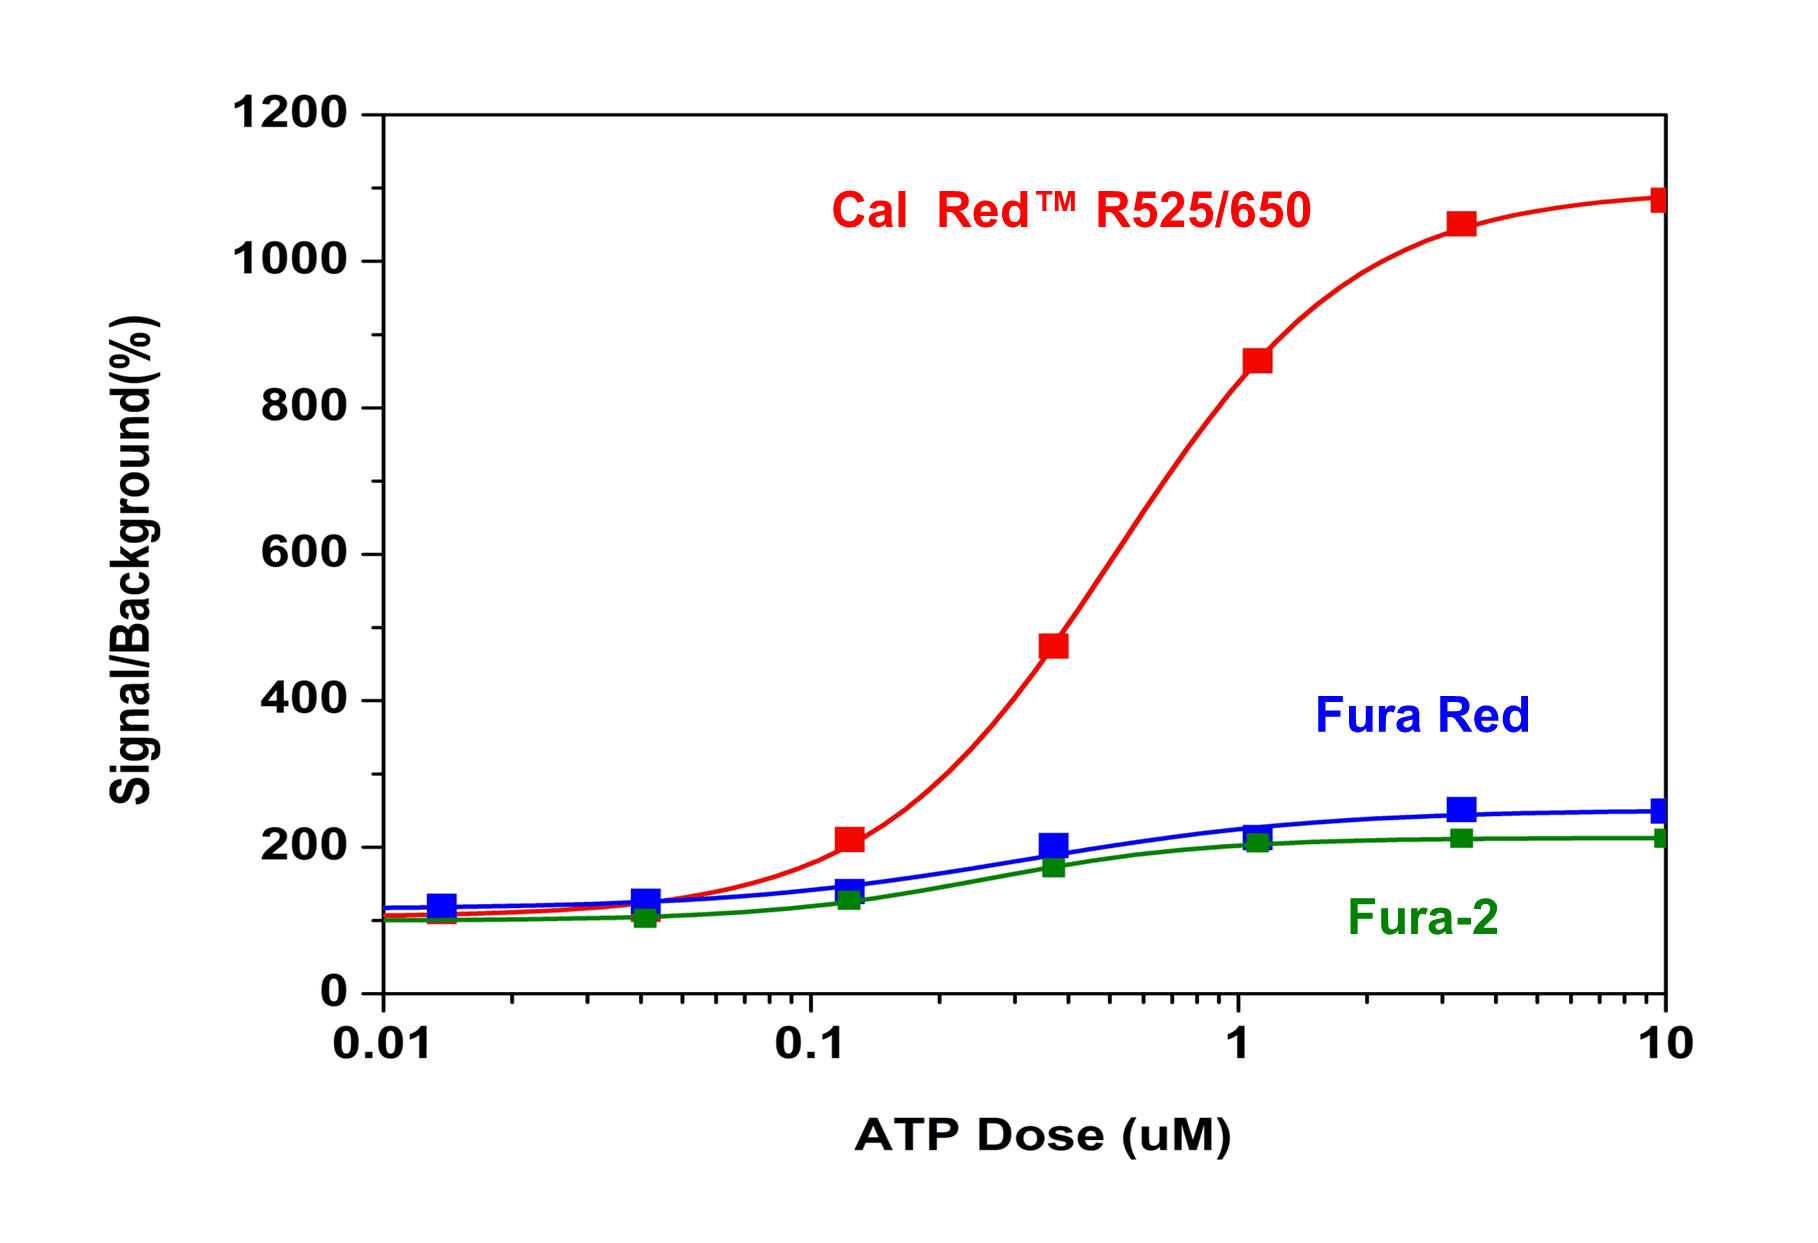 ATP-stimulated calcium response of endogenous P2Y receptor in CHO-K1 cells incubated with different Ca2+ indicators under the same conditions. ATP (50 μL/well) was added by FlexStation 3 (Molecular Devices) to achieve the final indicated concentrations. (Red: Cal Red R525/650, AM; Blue: Fura Red, AM; Green: Fura-2, AM)